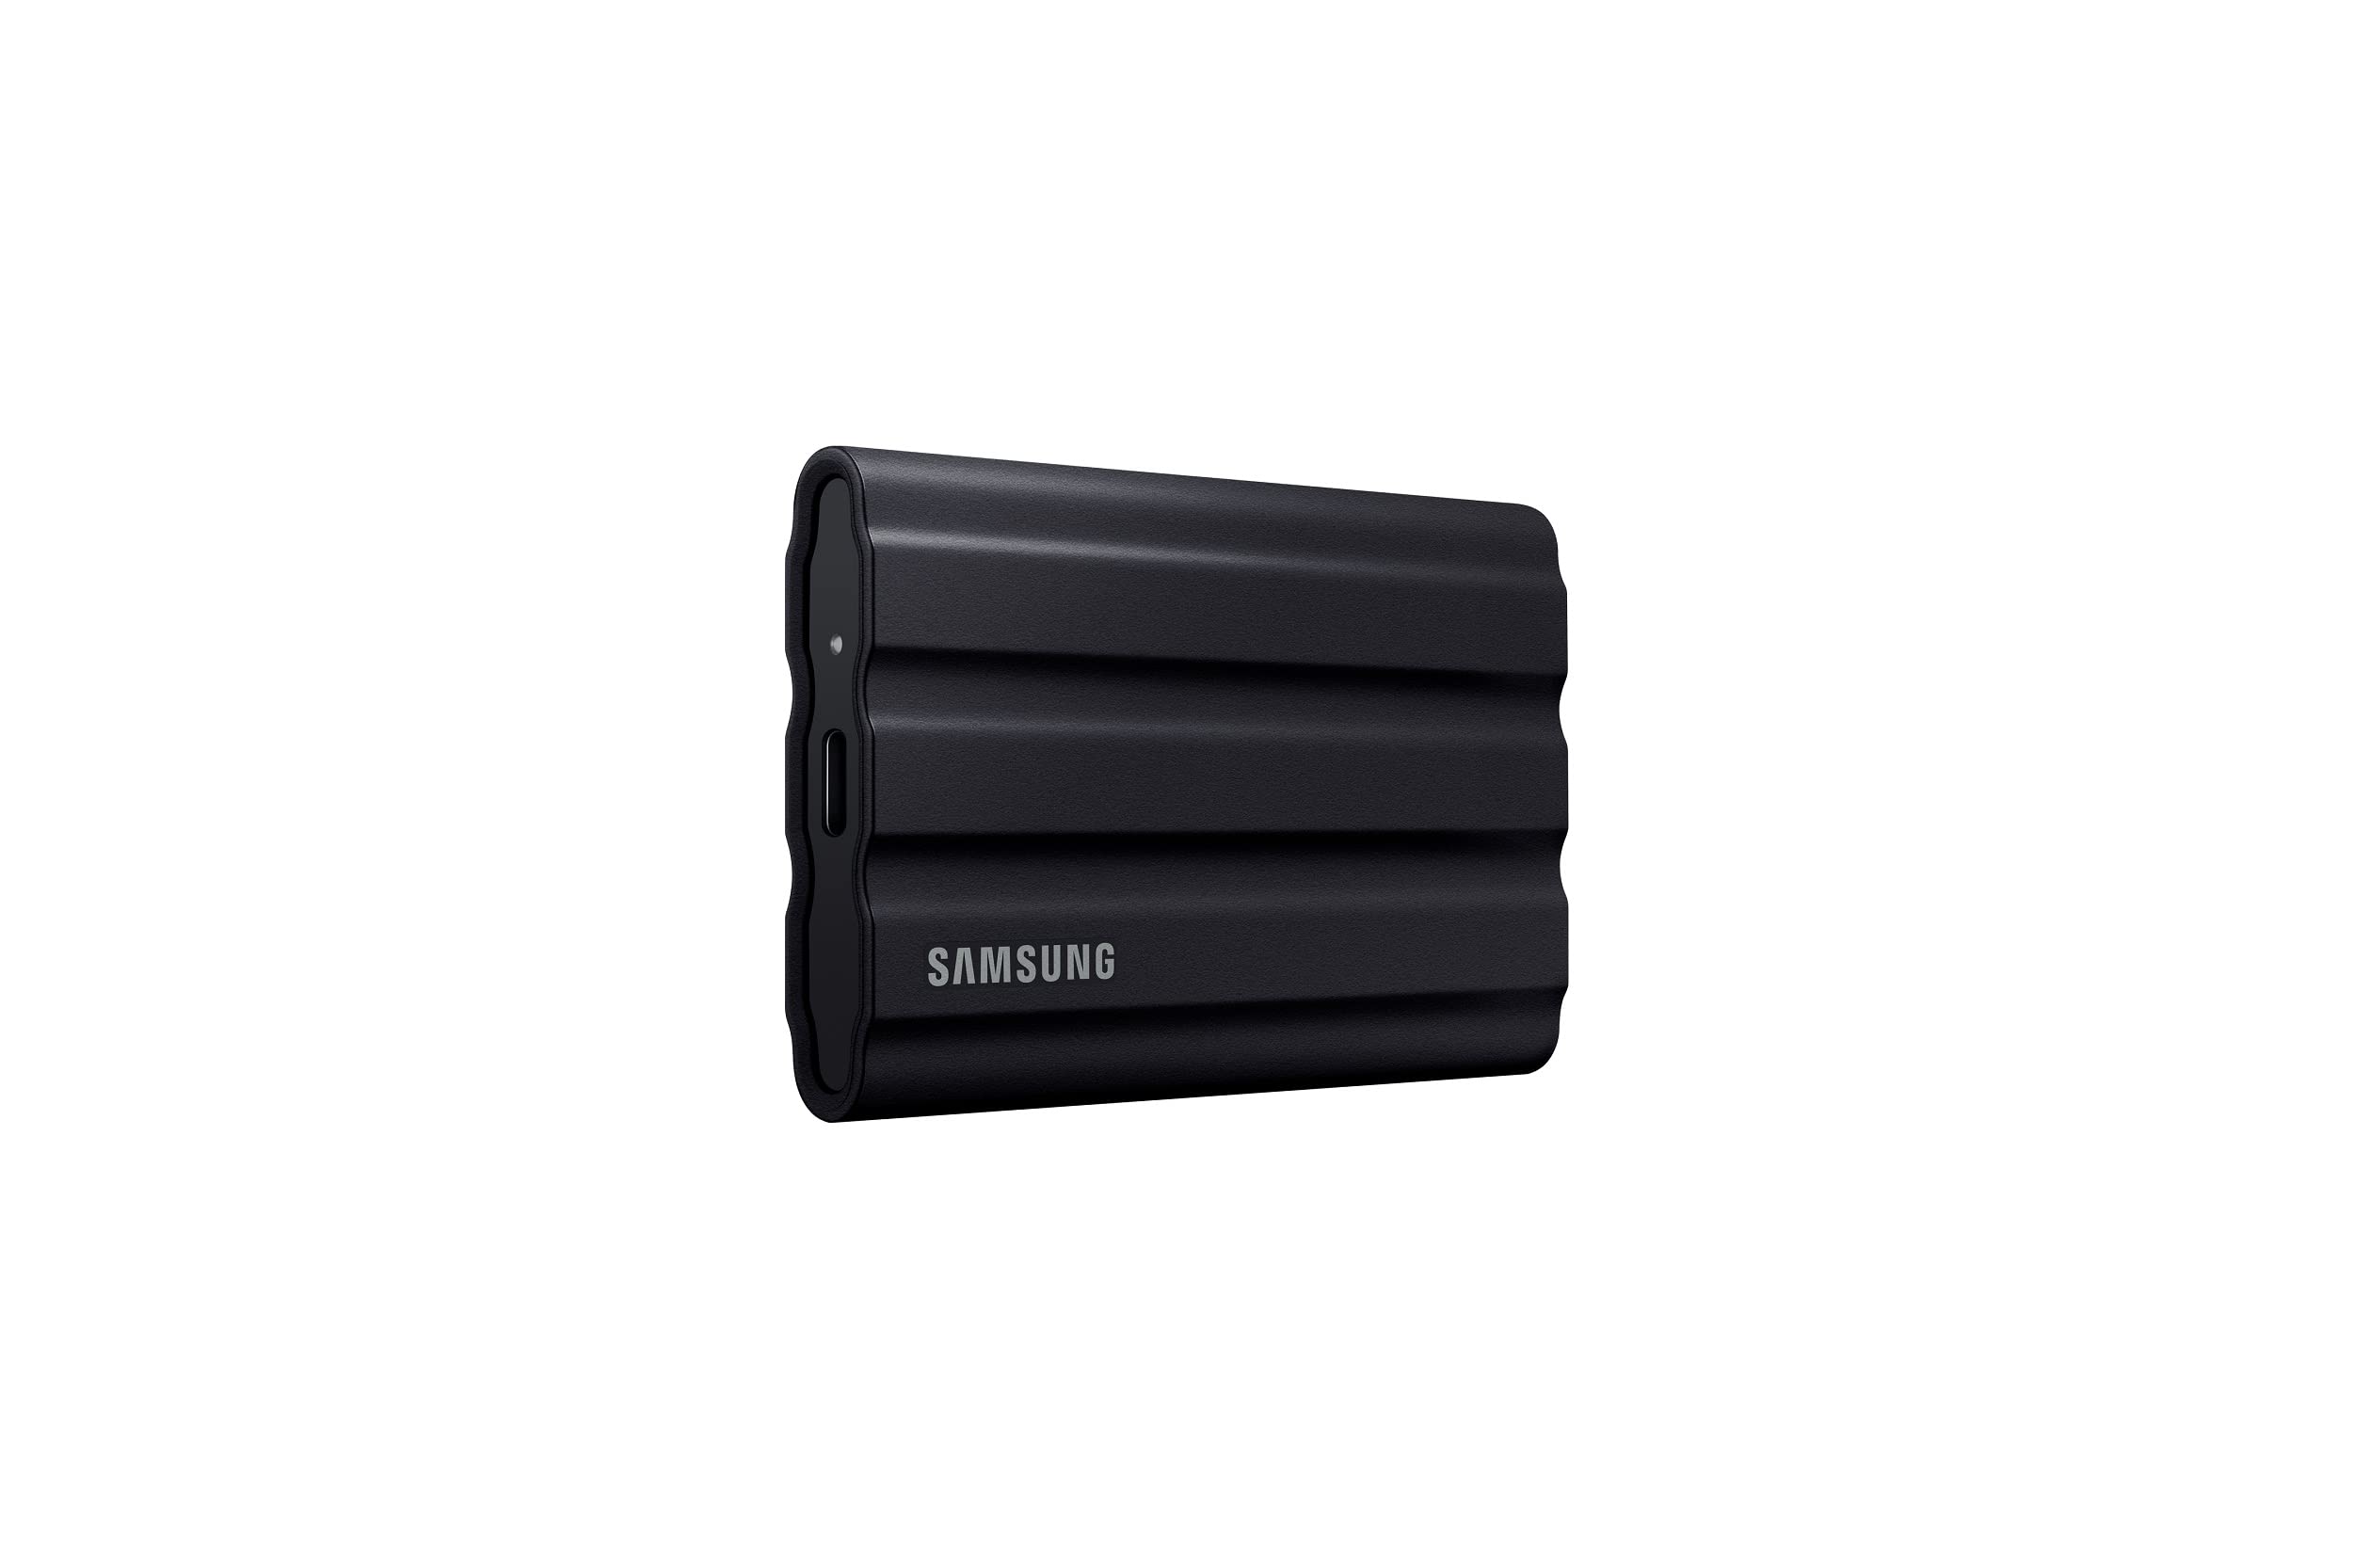 SAMSUNG T7 Shield 2TB Portable SSD up-to 1050MBs USB 3.2 Gen2 Rugged IP65 Water Dust Resistant for Photographers Co